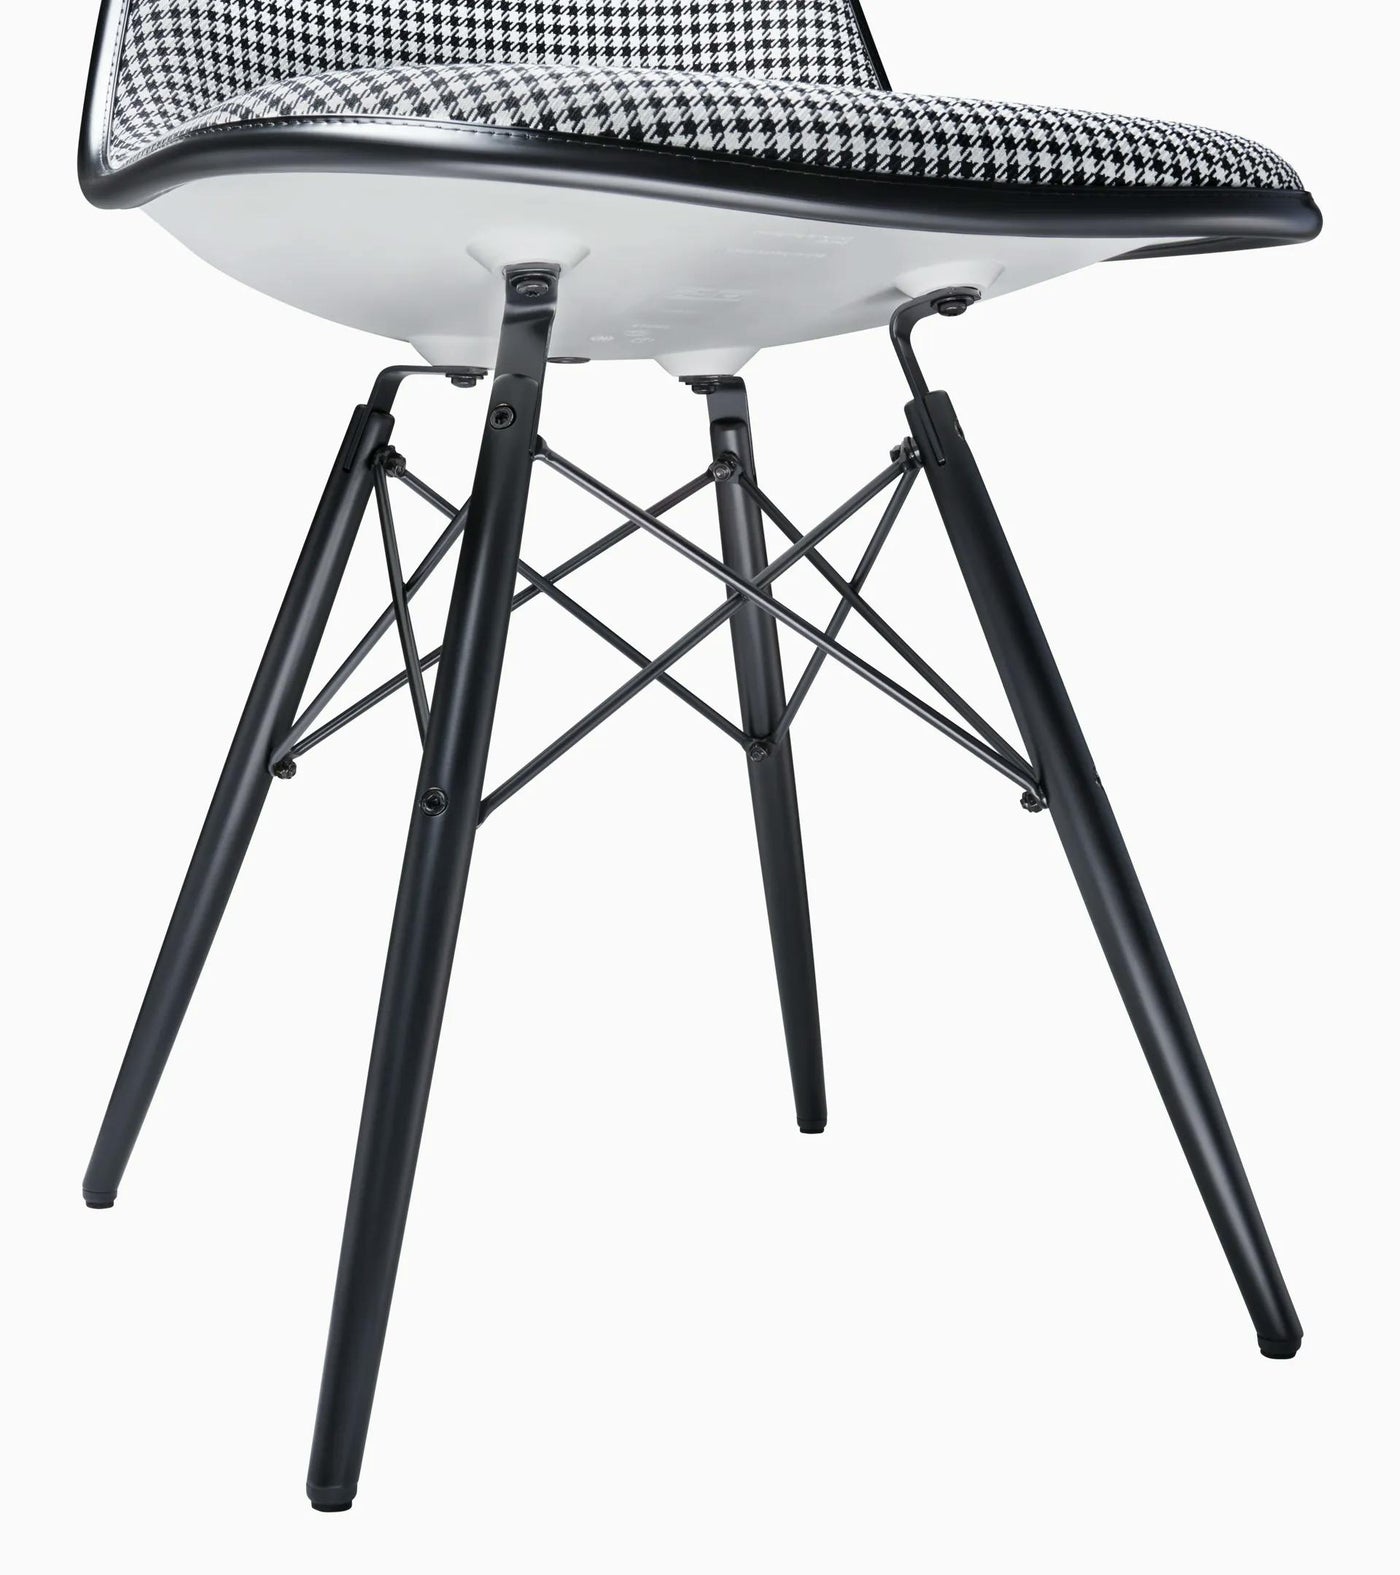 Porsche Eames Plastic Side Chair Pepita Edition – Limited Edition